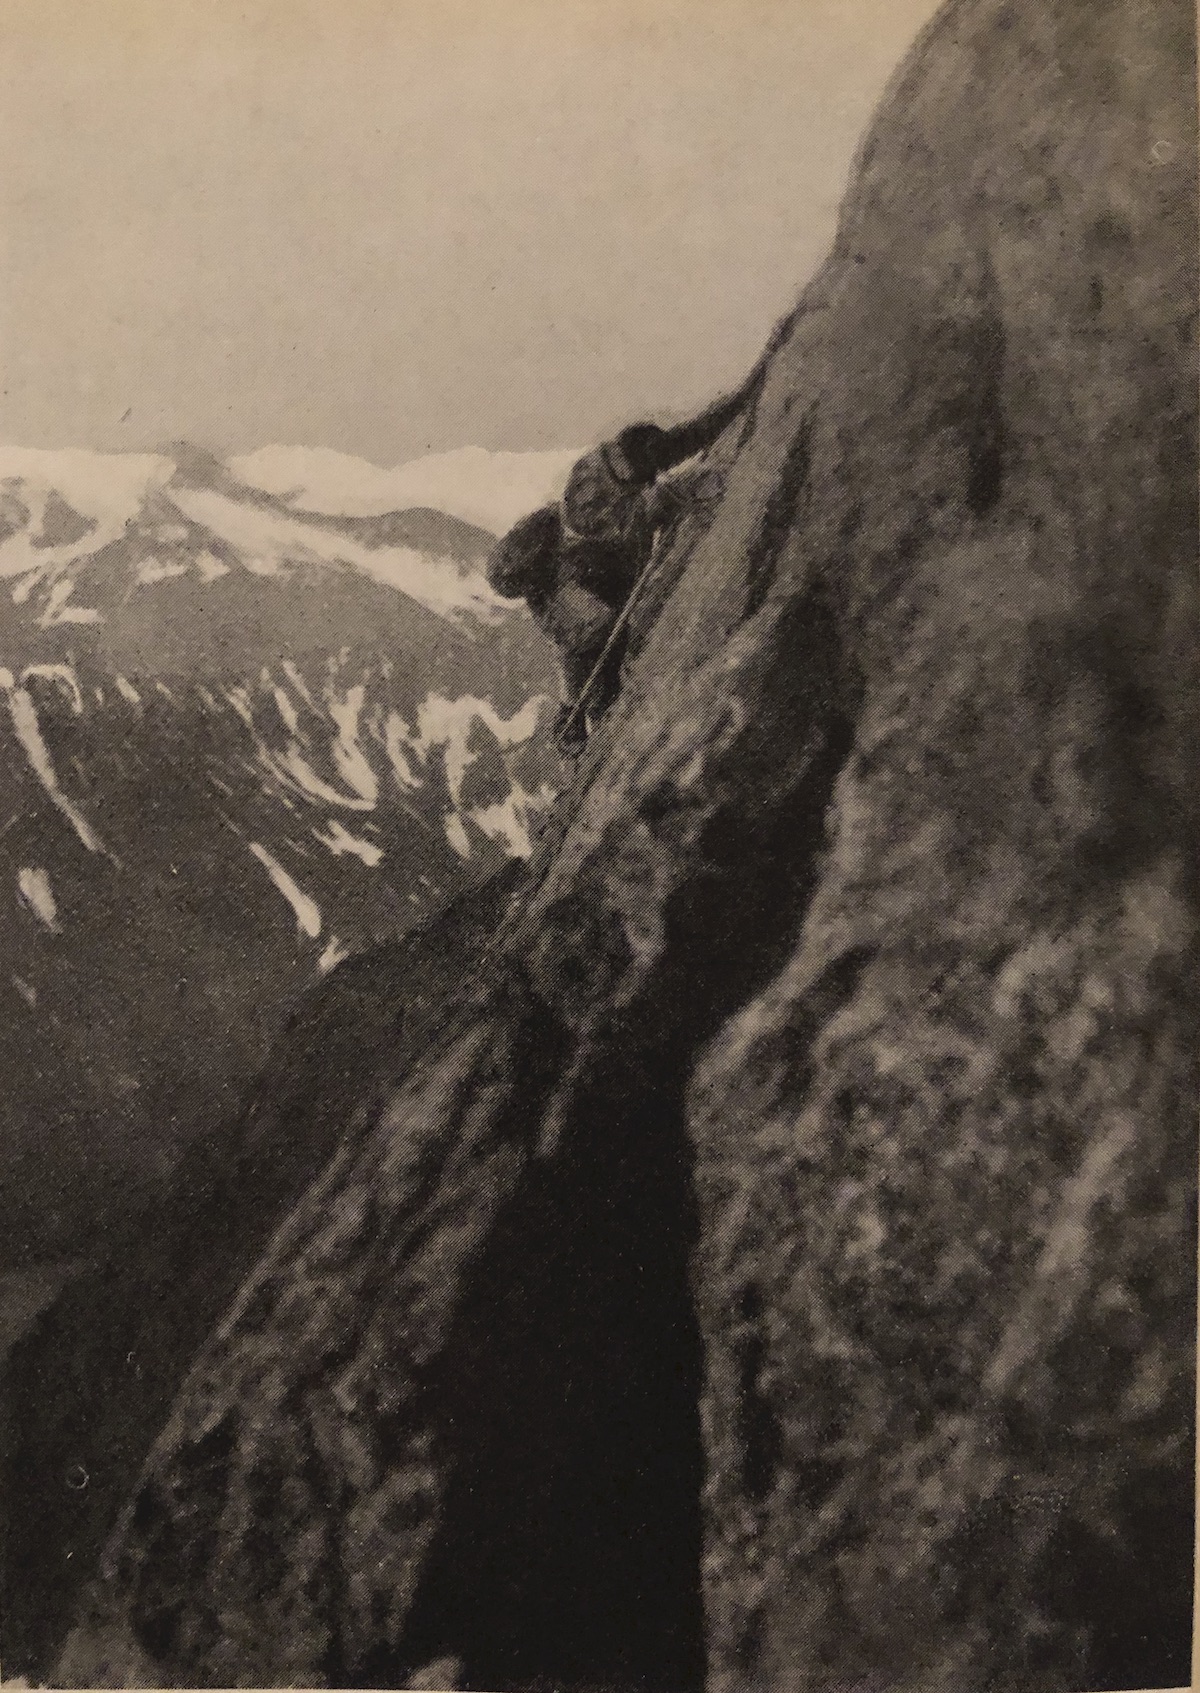 Ugo di Vallepiana on the first ascent, with Paul Preuss, of Pic Gamba on the Peuterey Ridge in 1913. [Photo] Paul Preuss / Courtesy David Smart